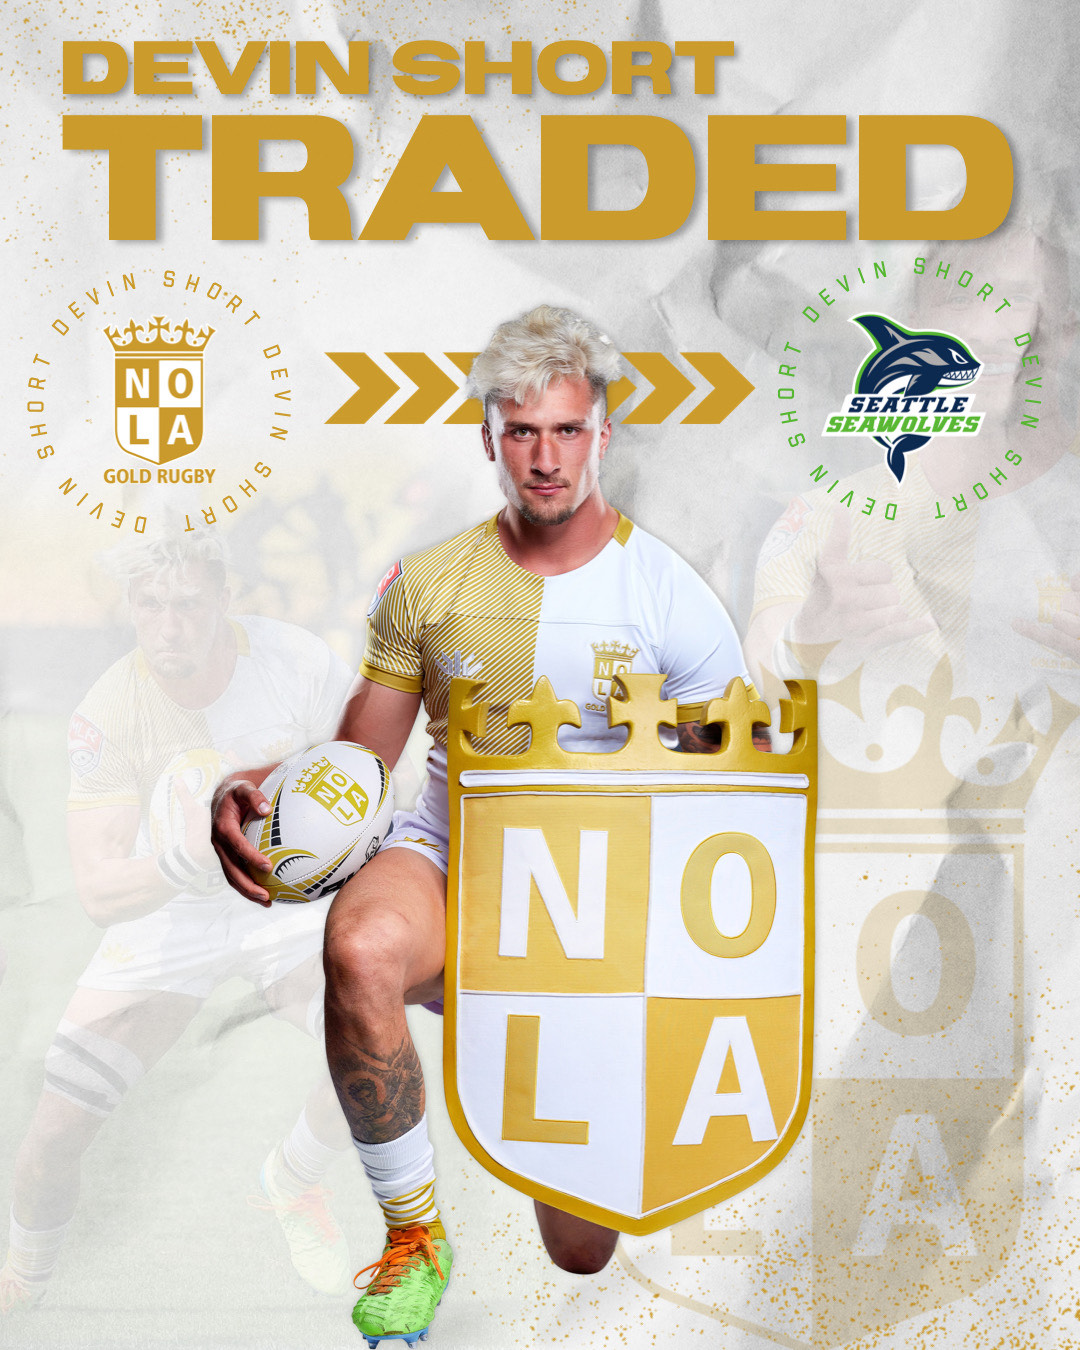 Devin Short traded to the Seattle Seawolves